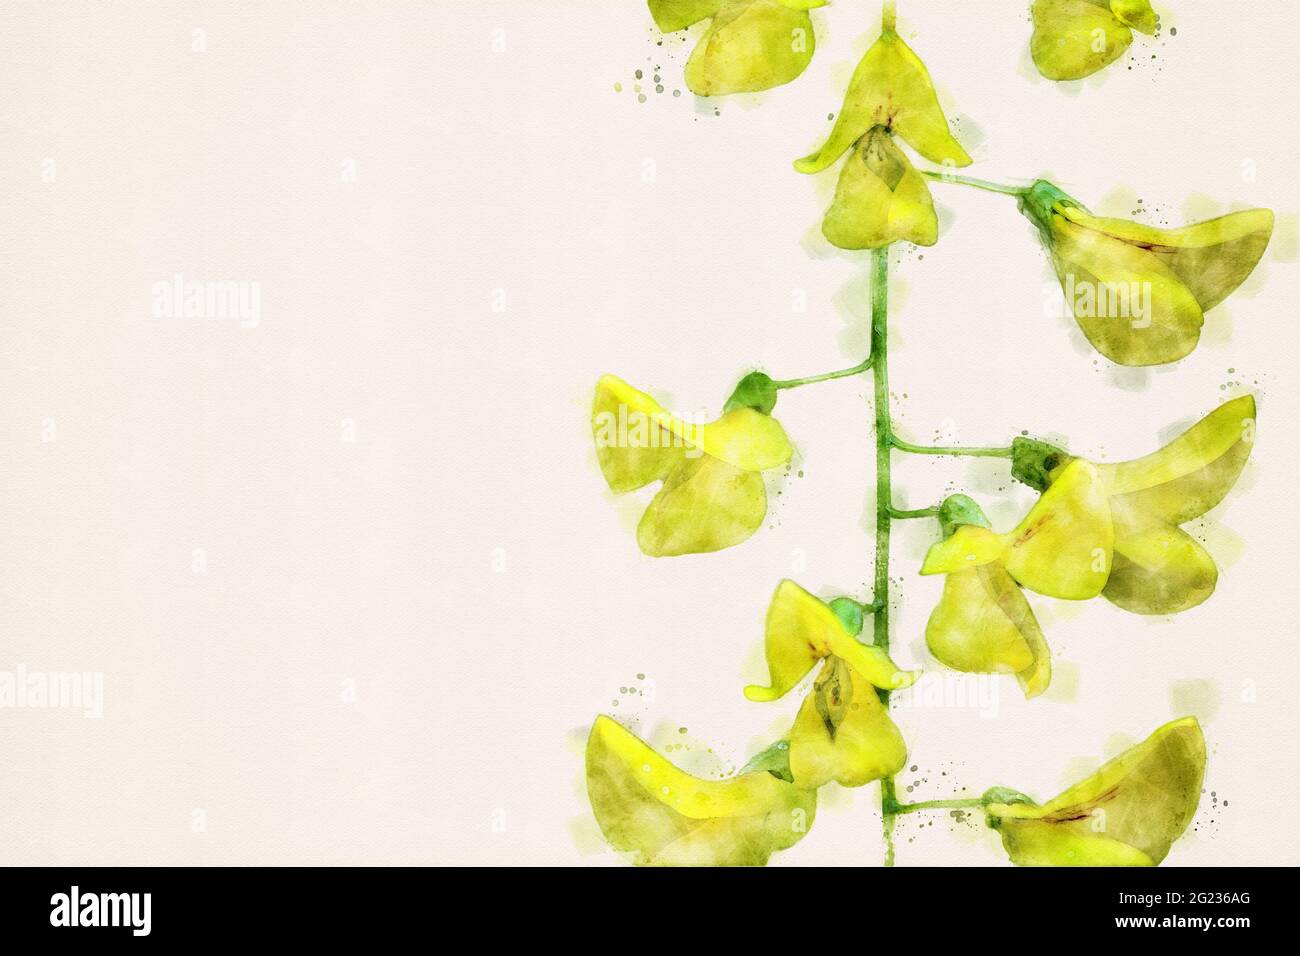 Laburnum, golden rain plant in bloom. Yellow flowers of golden chain. Floral design closeup macro, isolated with copy space. Watercolor illustration. Stock Photo